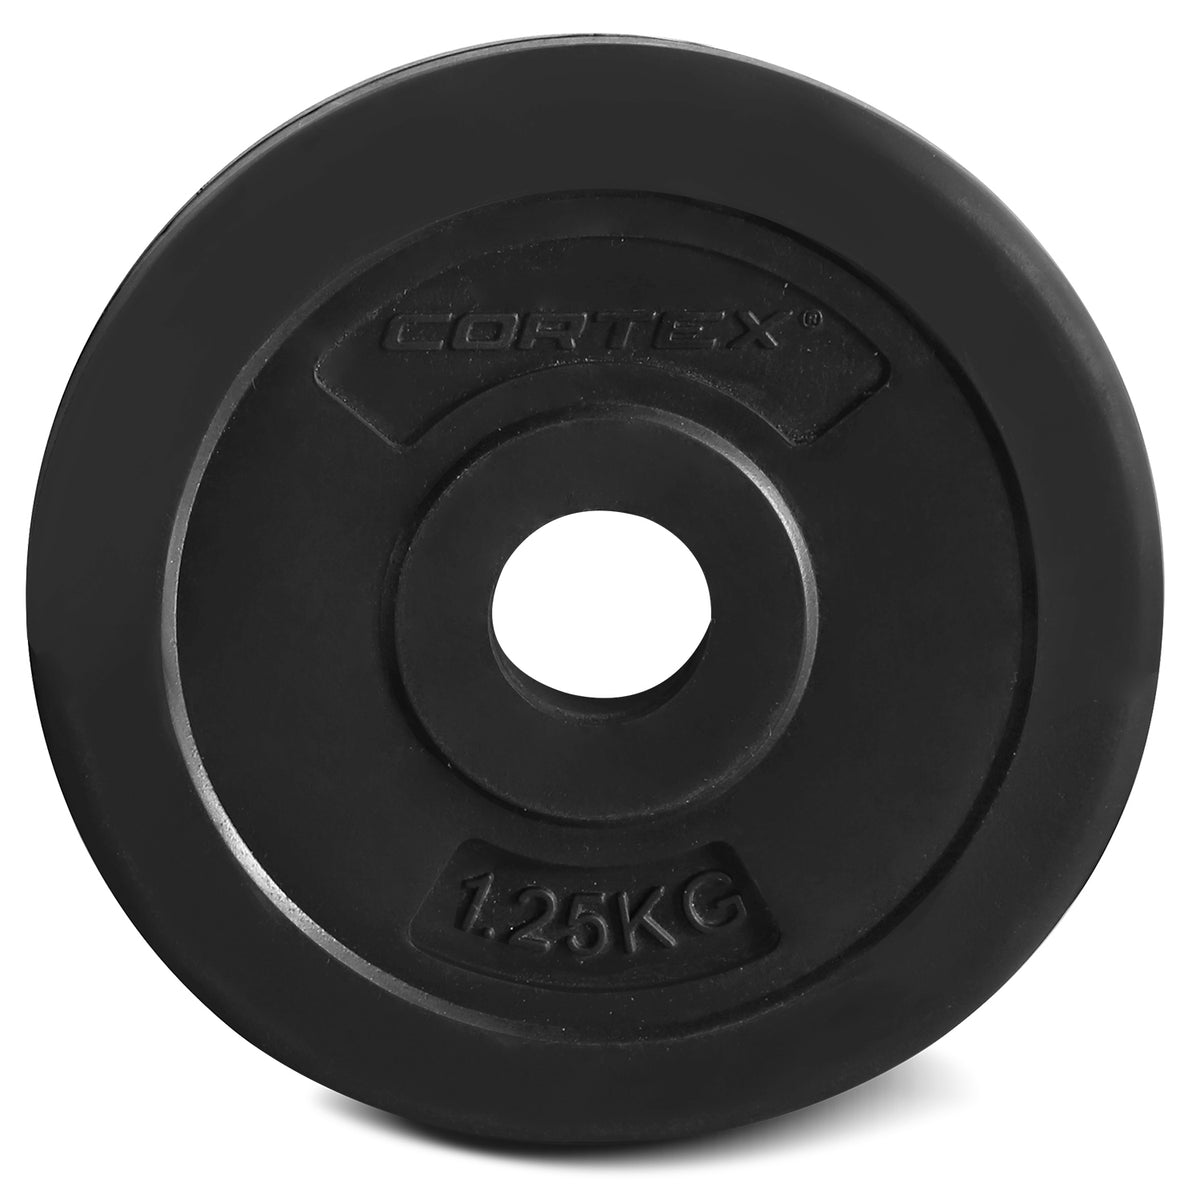 LSG GBN006 FID Bench with 84kg Weight and Bar set